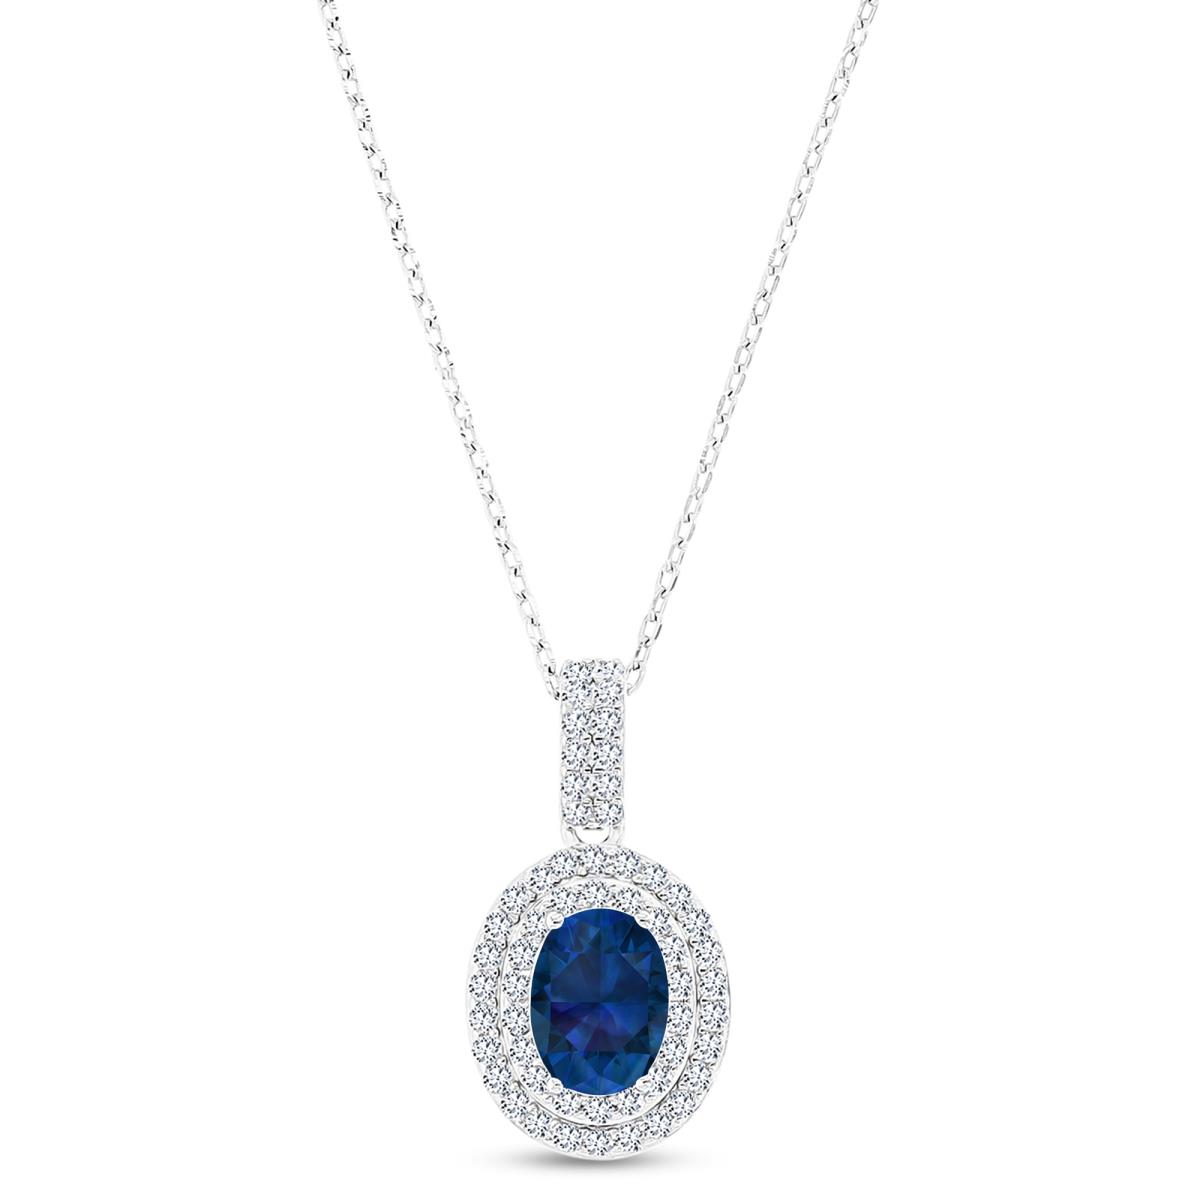 Sterling Silver Rhodium 8x6mm Oval Cr Blue Sapphire & Cr White Sapphire Halo 16"+2" Necklace